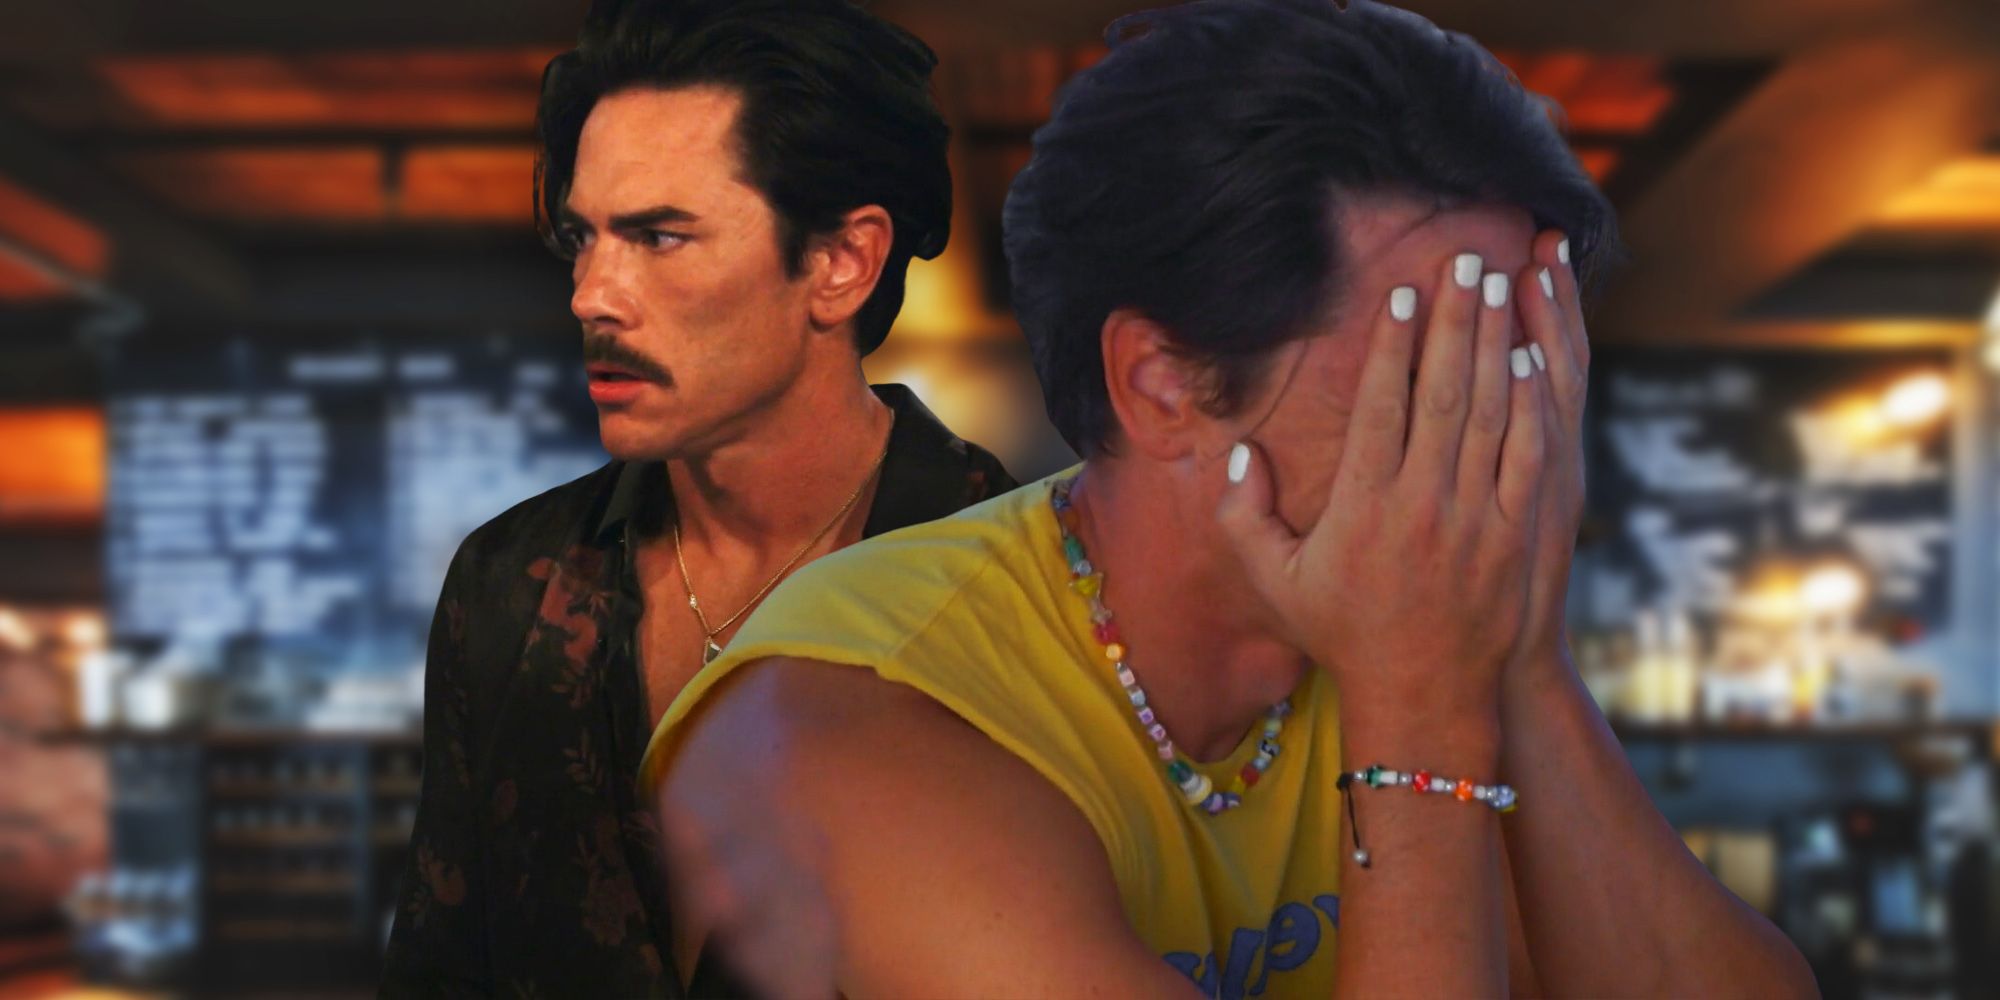 Side by side images of Vanderpump Rules' Tom Sandoval looking worried and with his hands over his face